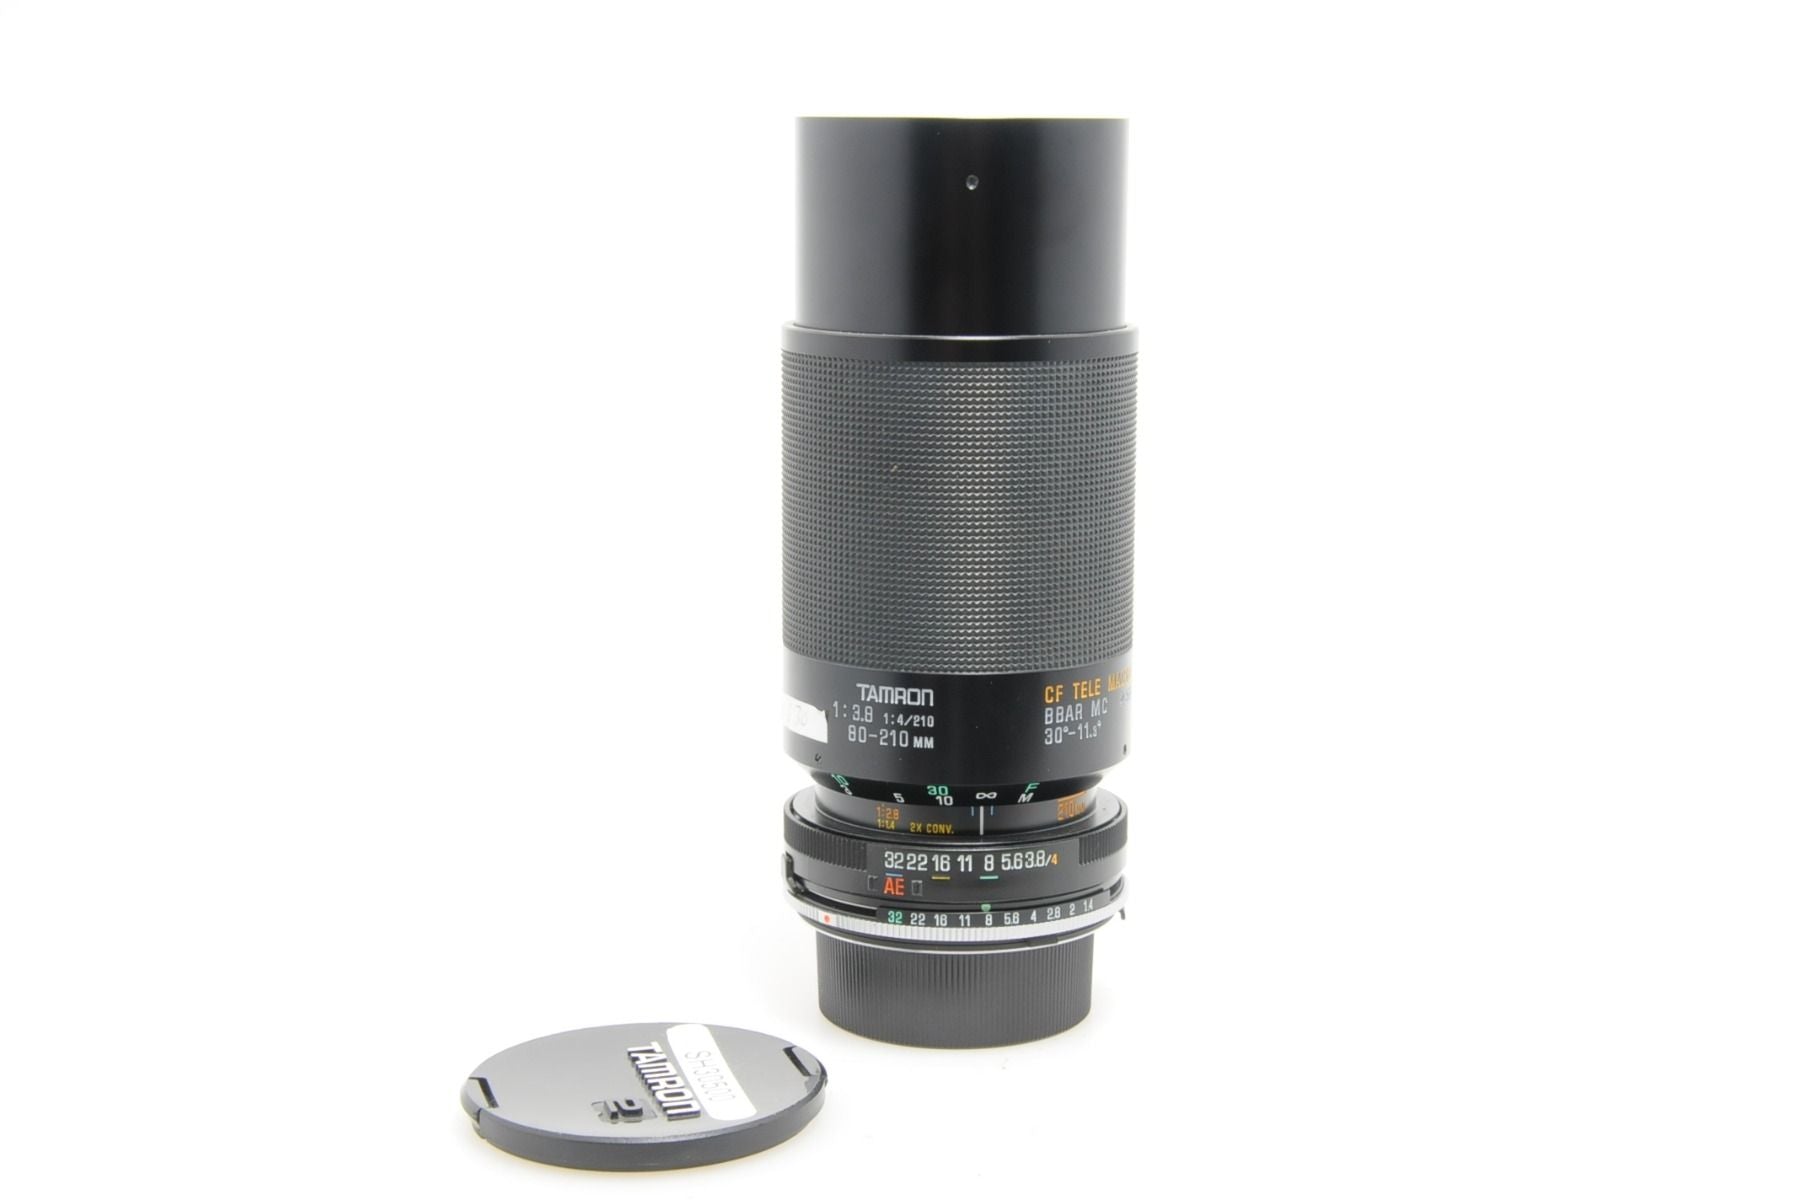 Product Image of Used Tamron 80-210mm f3.8-4 Adaptall II lens with Minolta MD mount (Case, SH30500)